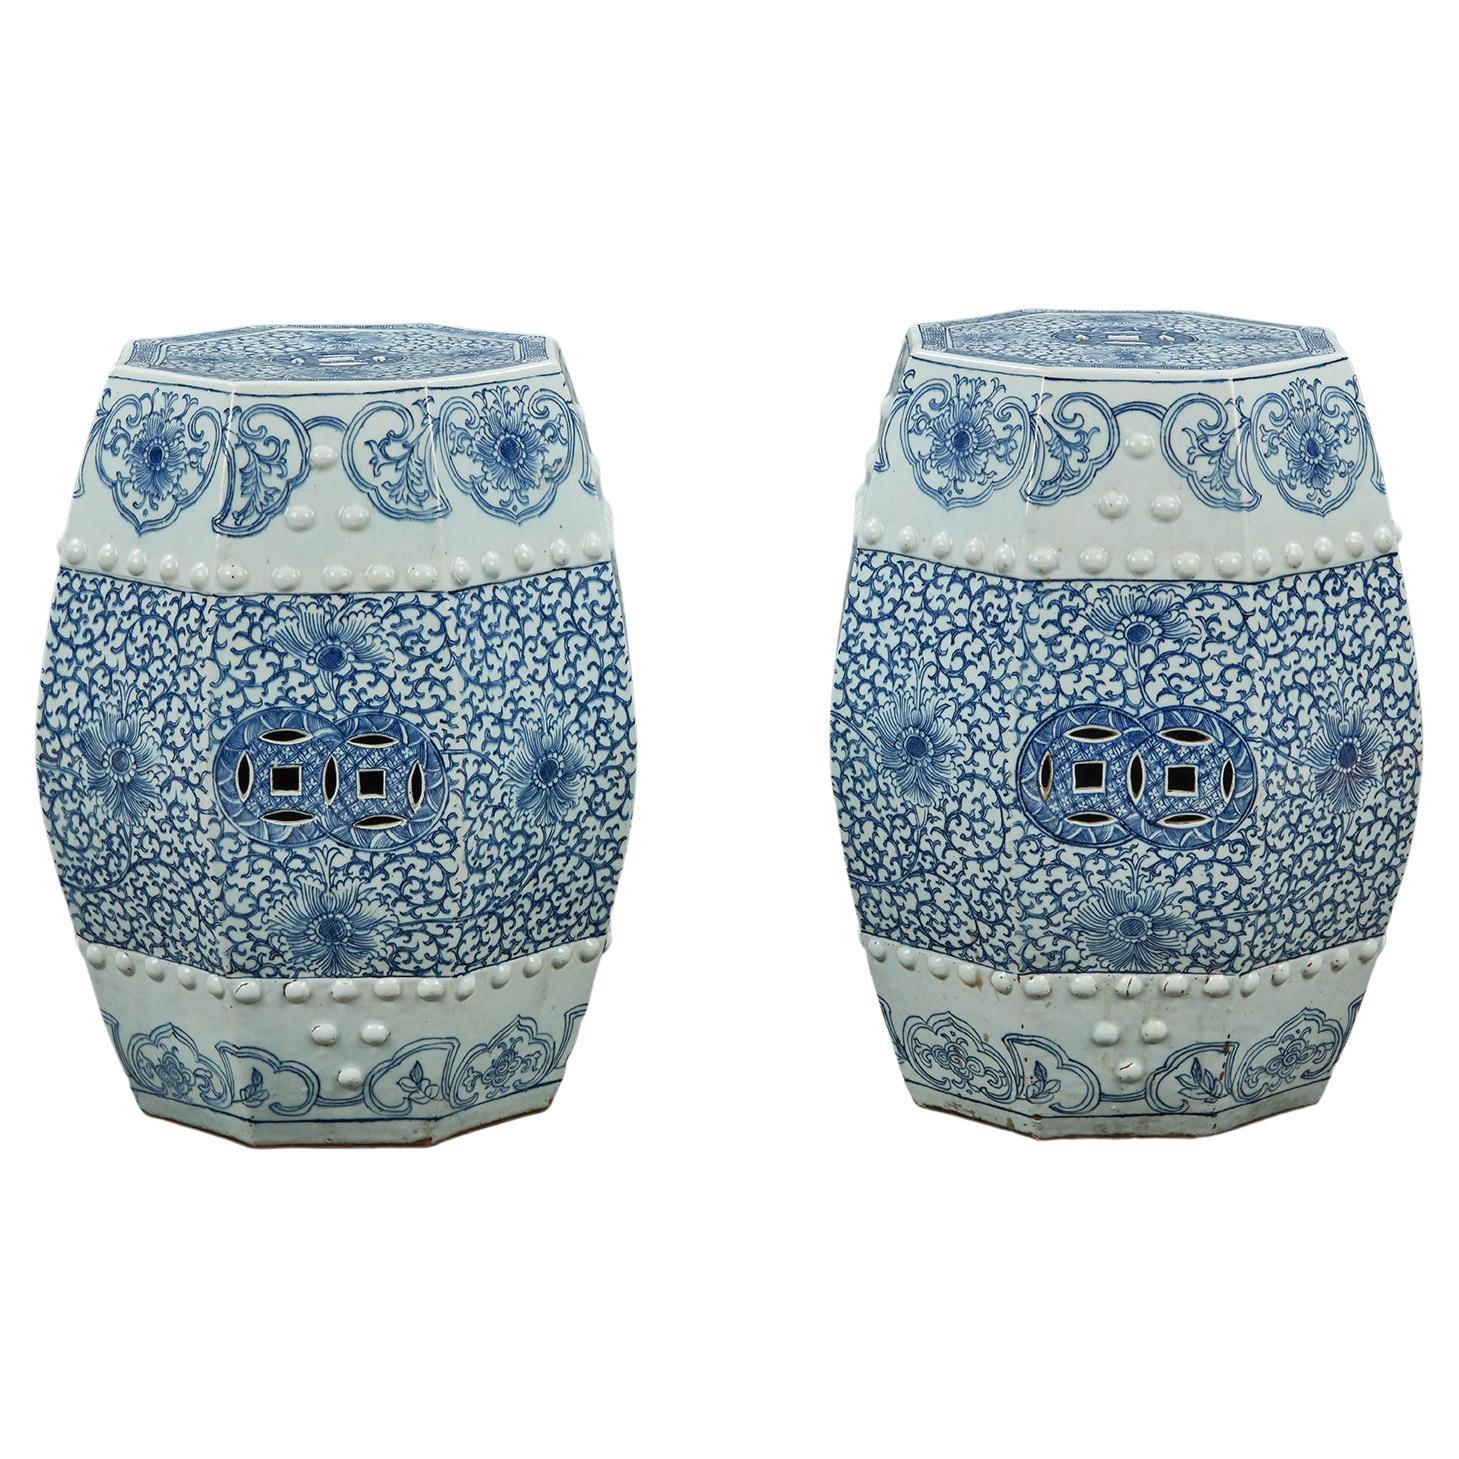 What is Chinese blue and white porcelain?